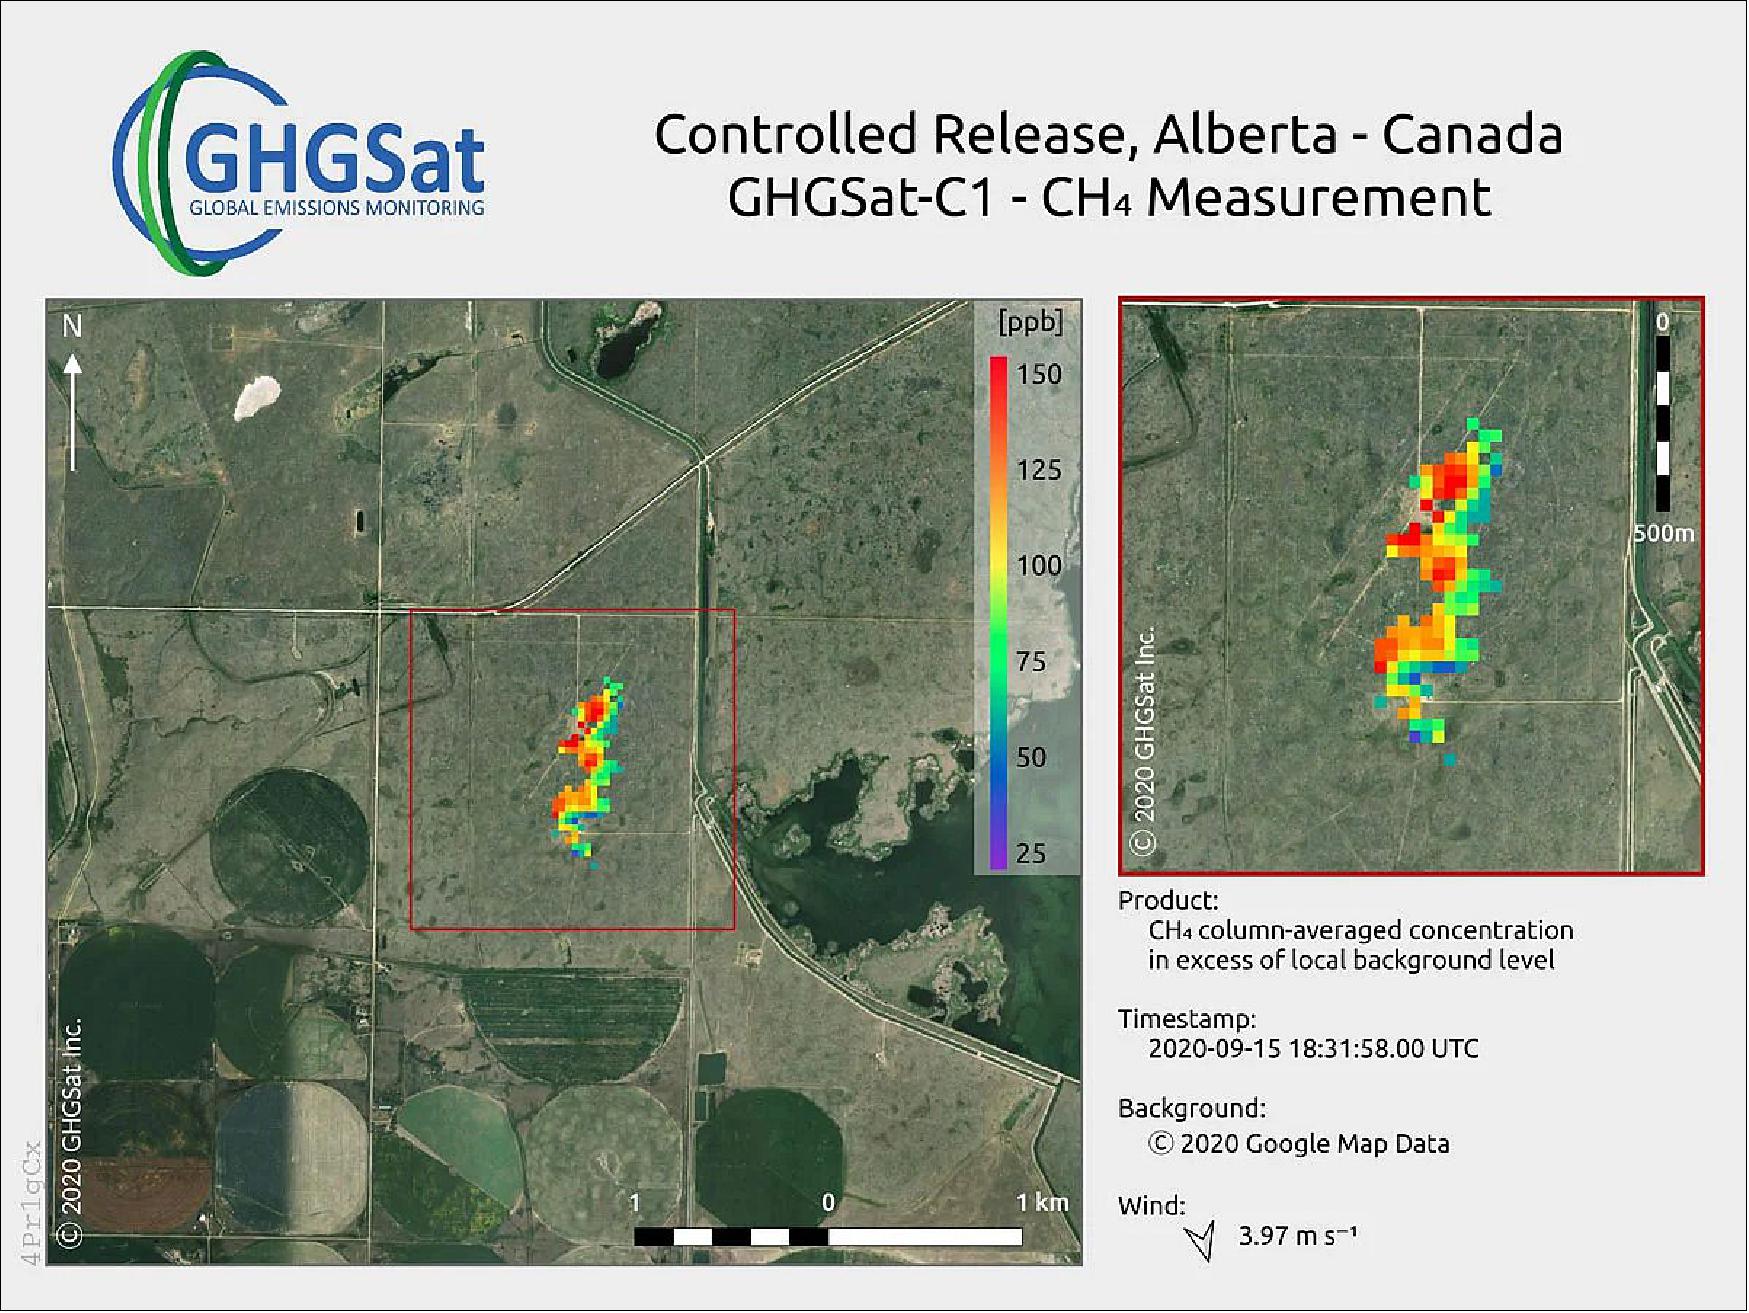 Figure 16: This image was taken on 15 September 2020, by GHGSat’s second satellite Iris. The spacecraft was tasked with measuring a controlled release of methane from a facility in Alberta, Canada. Ground measurements of the controlled release confirmed an emission rate of 260 kg CH4/hr. Iris maps plumes of methane in the atmosphere down to 25 m on the ground, detecting and measuring emissions from point sources 100 times smaller than any comparable system with a resolution 100 times higher, comparable to the emissions from a large landfill. GHGSat Inc. created the sample image by colorizing the methane concentration measurements that exceeded normal background levels captured over the Alberta test site. The colorized measurements are overlaid on an aerial photograph to provide context (image credit: GHGSat)